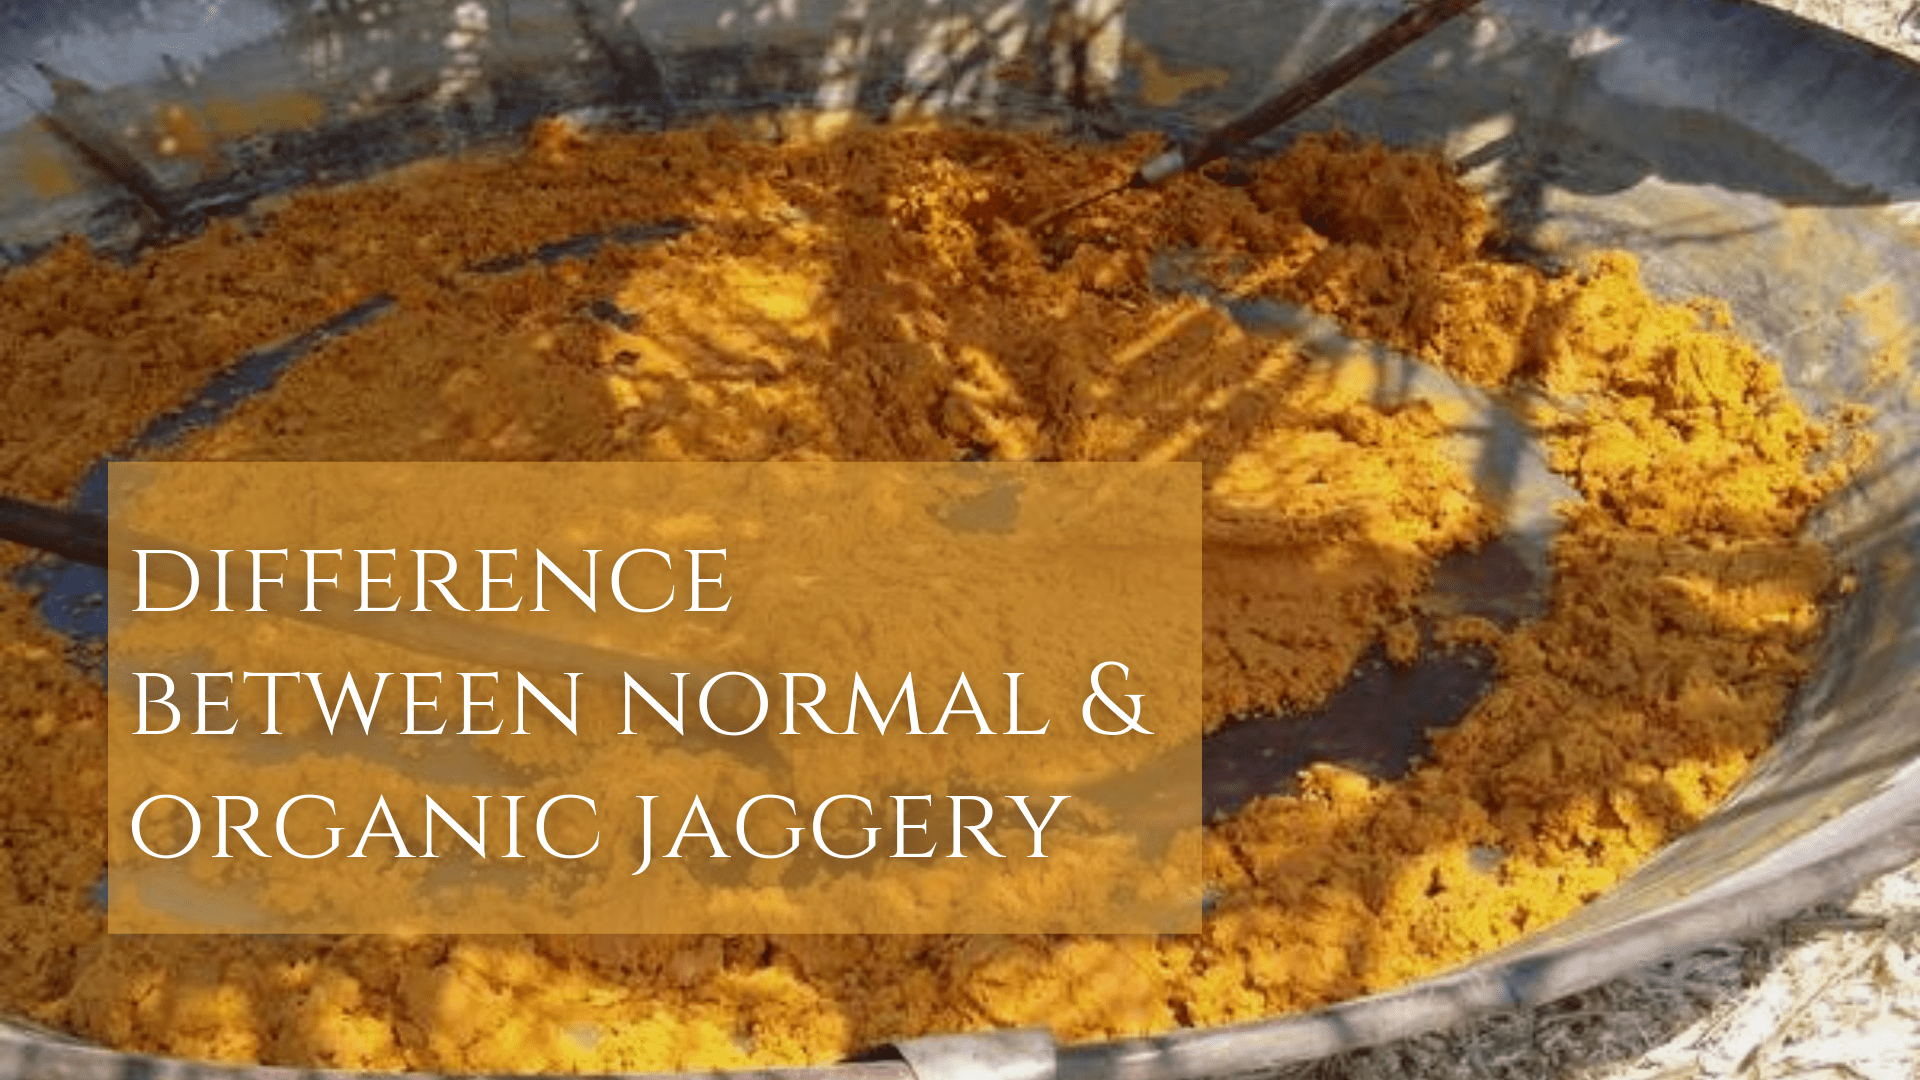 Difference Between Organic Jaggery and Normal Jaggery